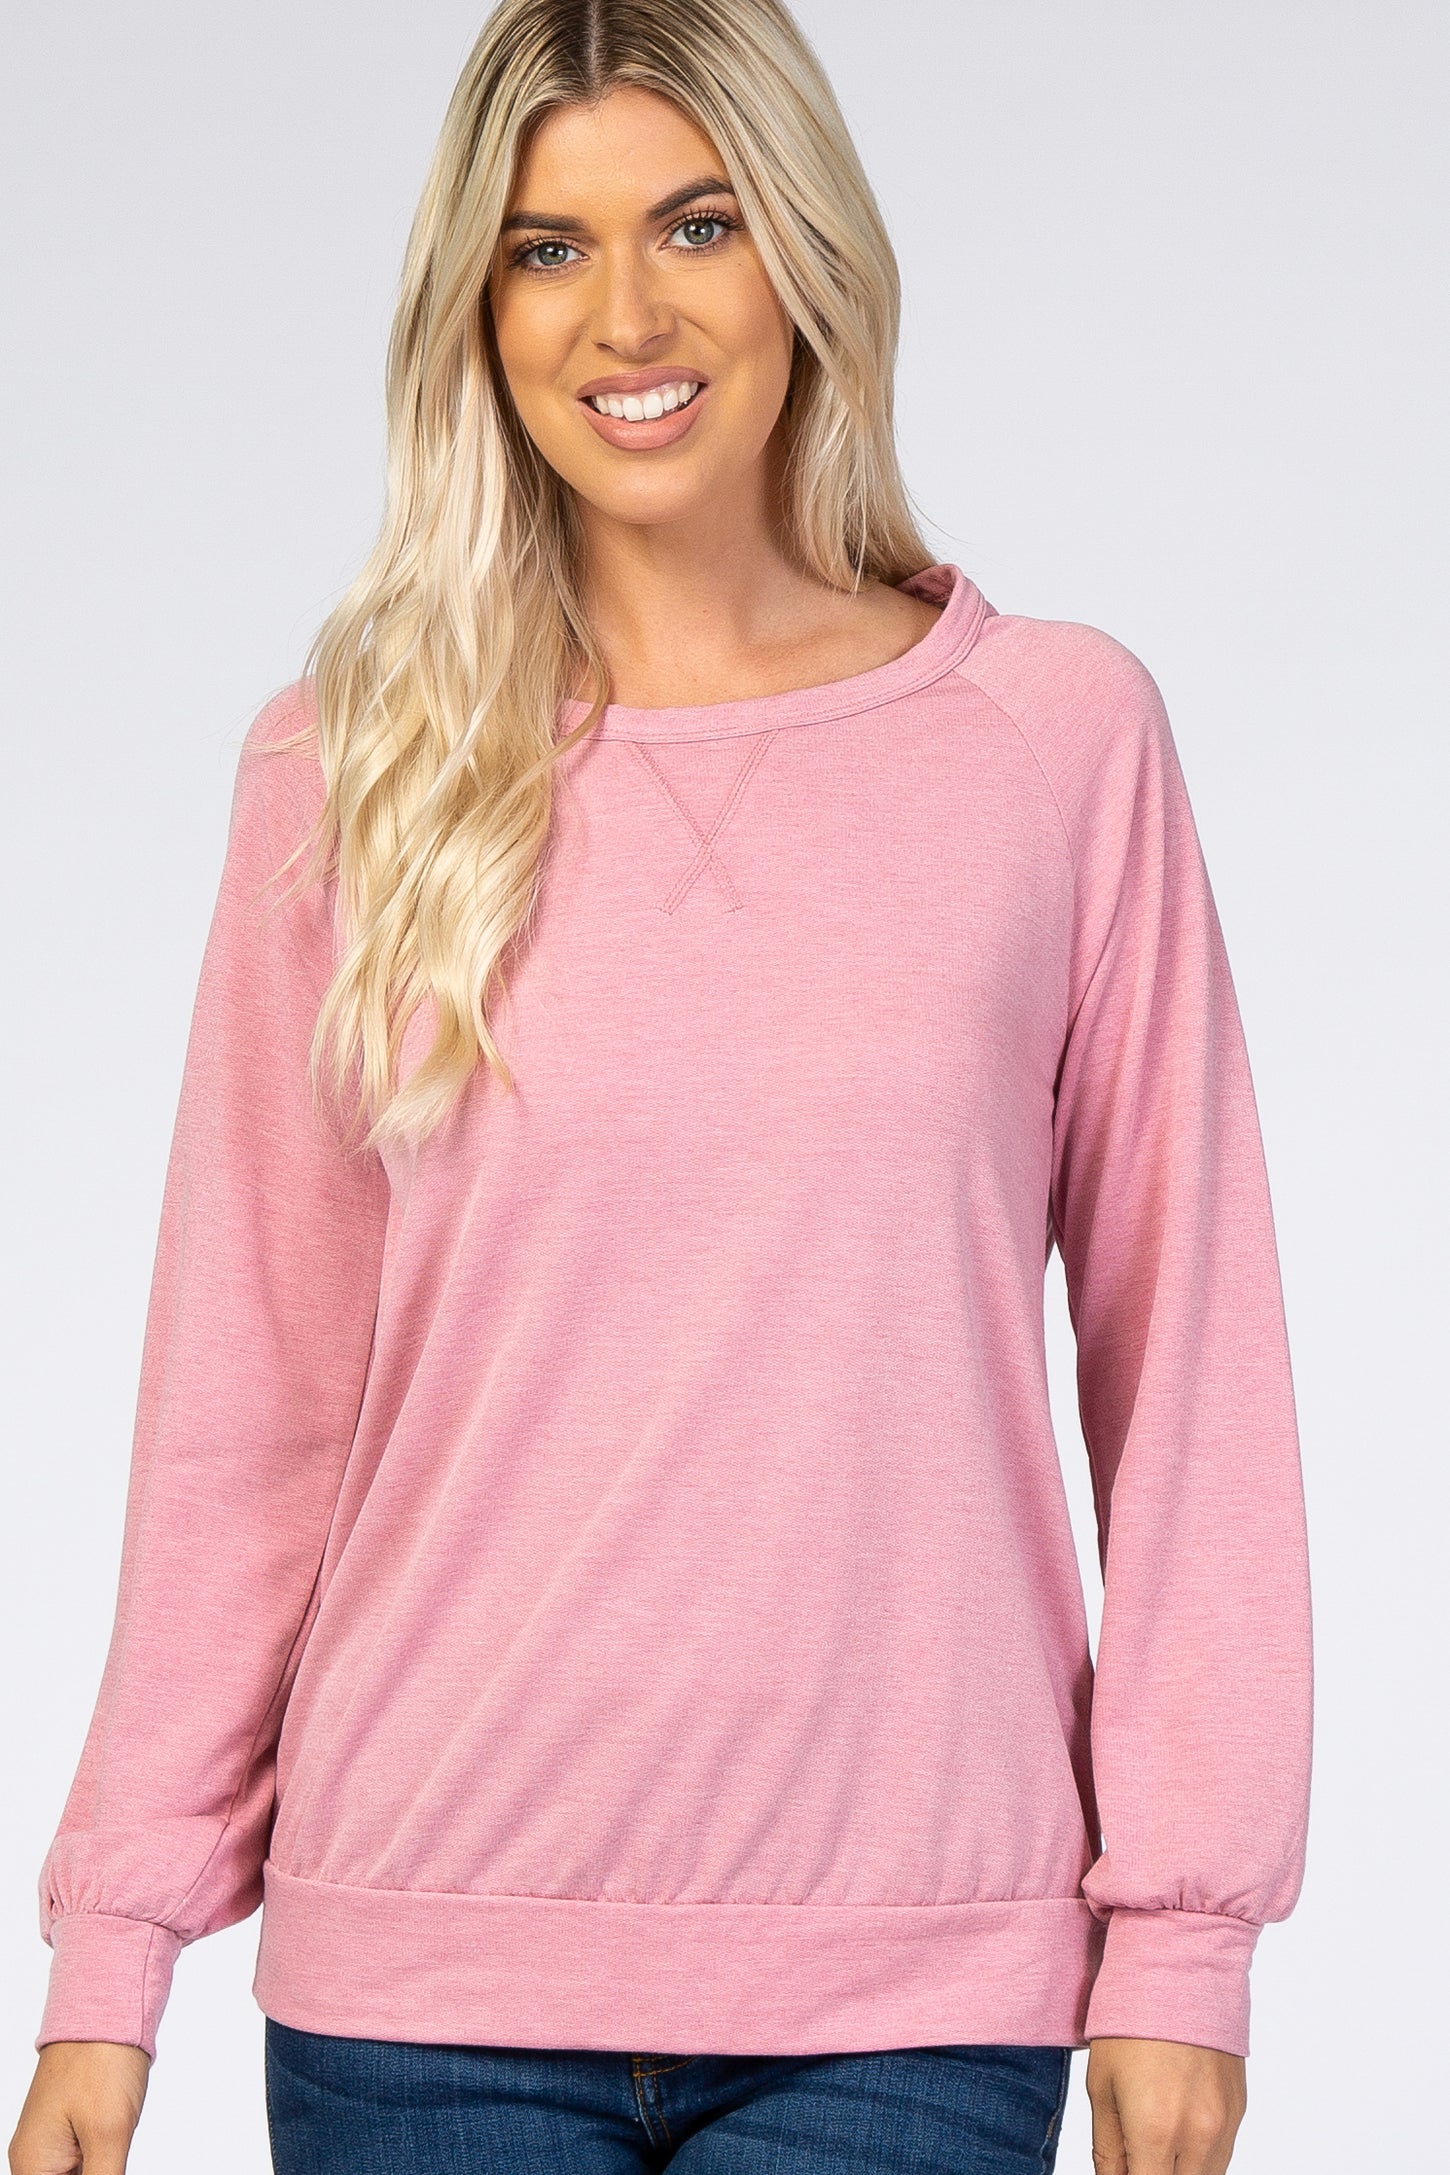 Faded Pink Soft Long Sleeve Top